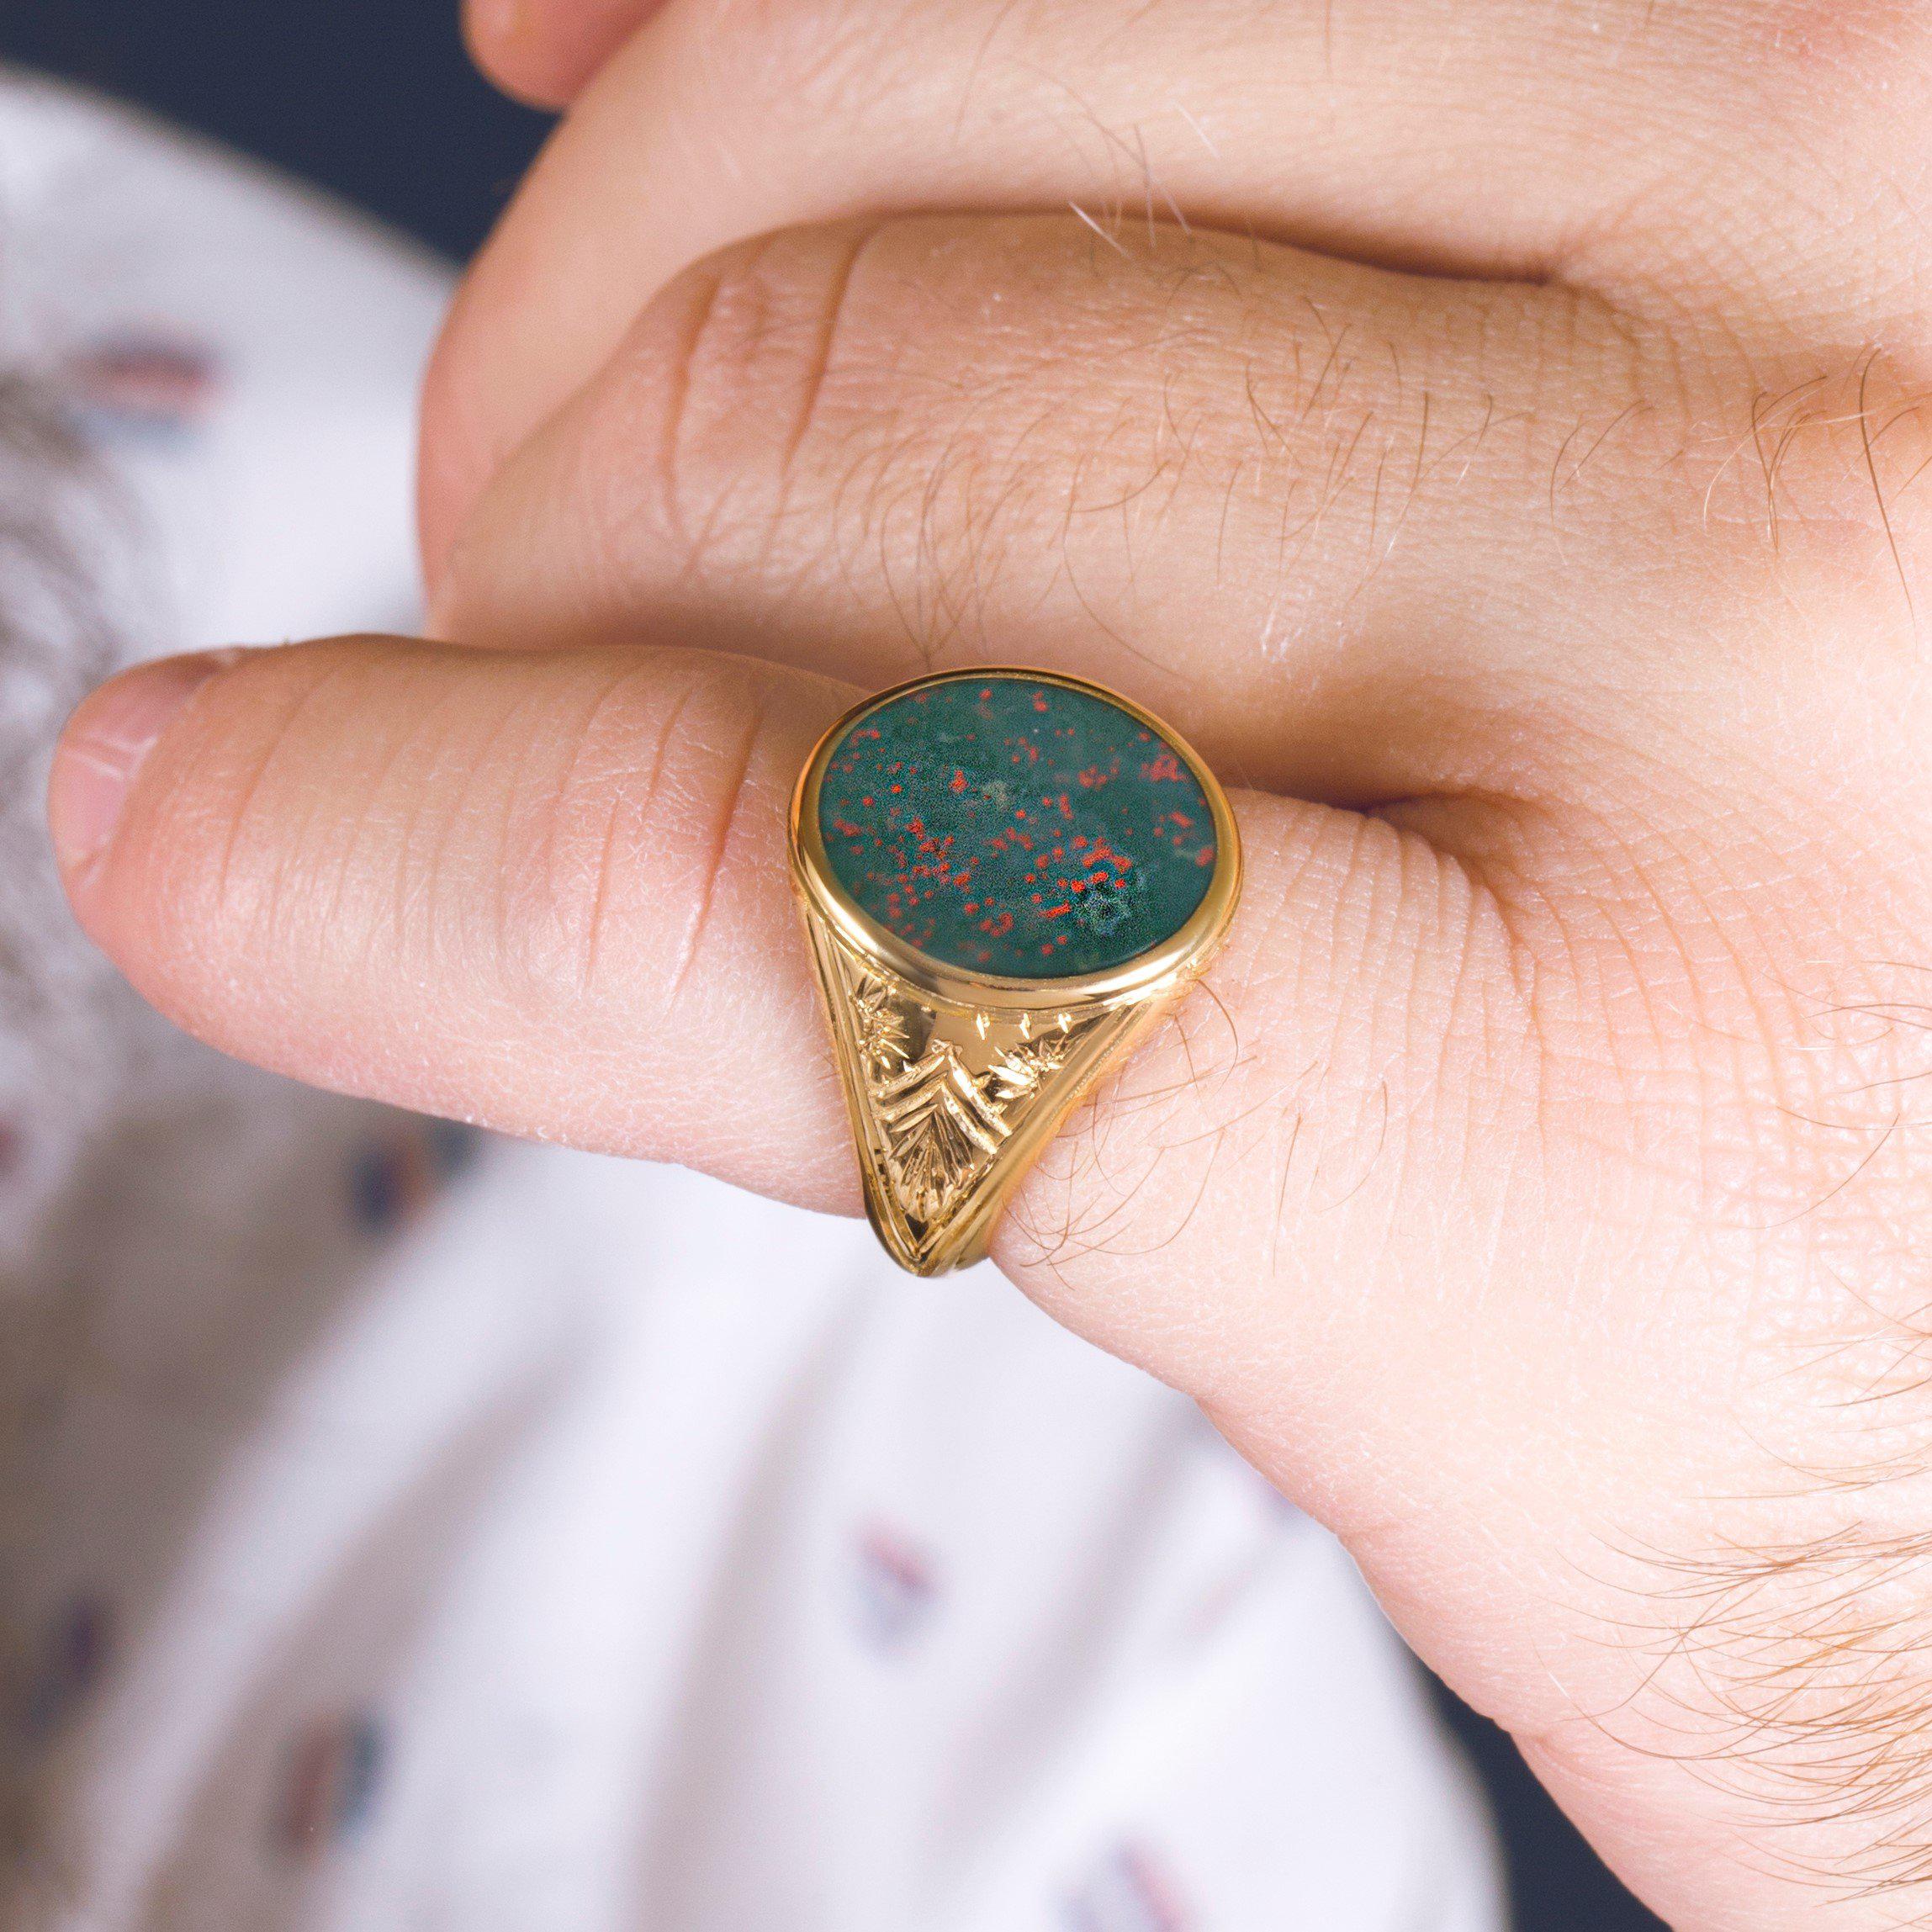 Buy Bloodstone Signet Ring, Custom Gold Heraldry Ring, Roberts Family  Crest, Bloodstone Gold Signet, Coat of Arms Signet Ring, Engraved Ring  Online in India - Etsy